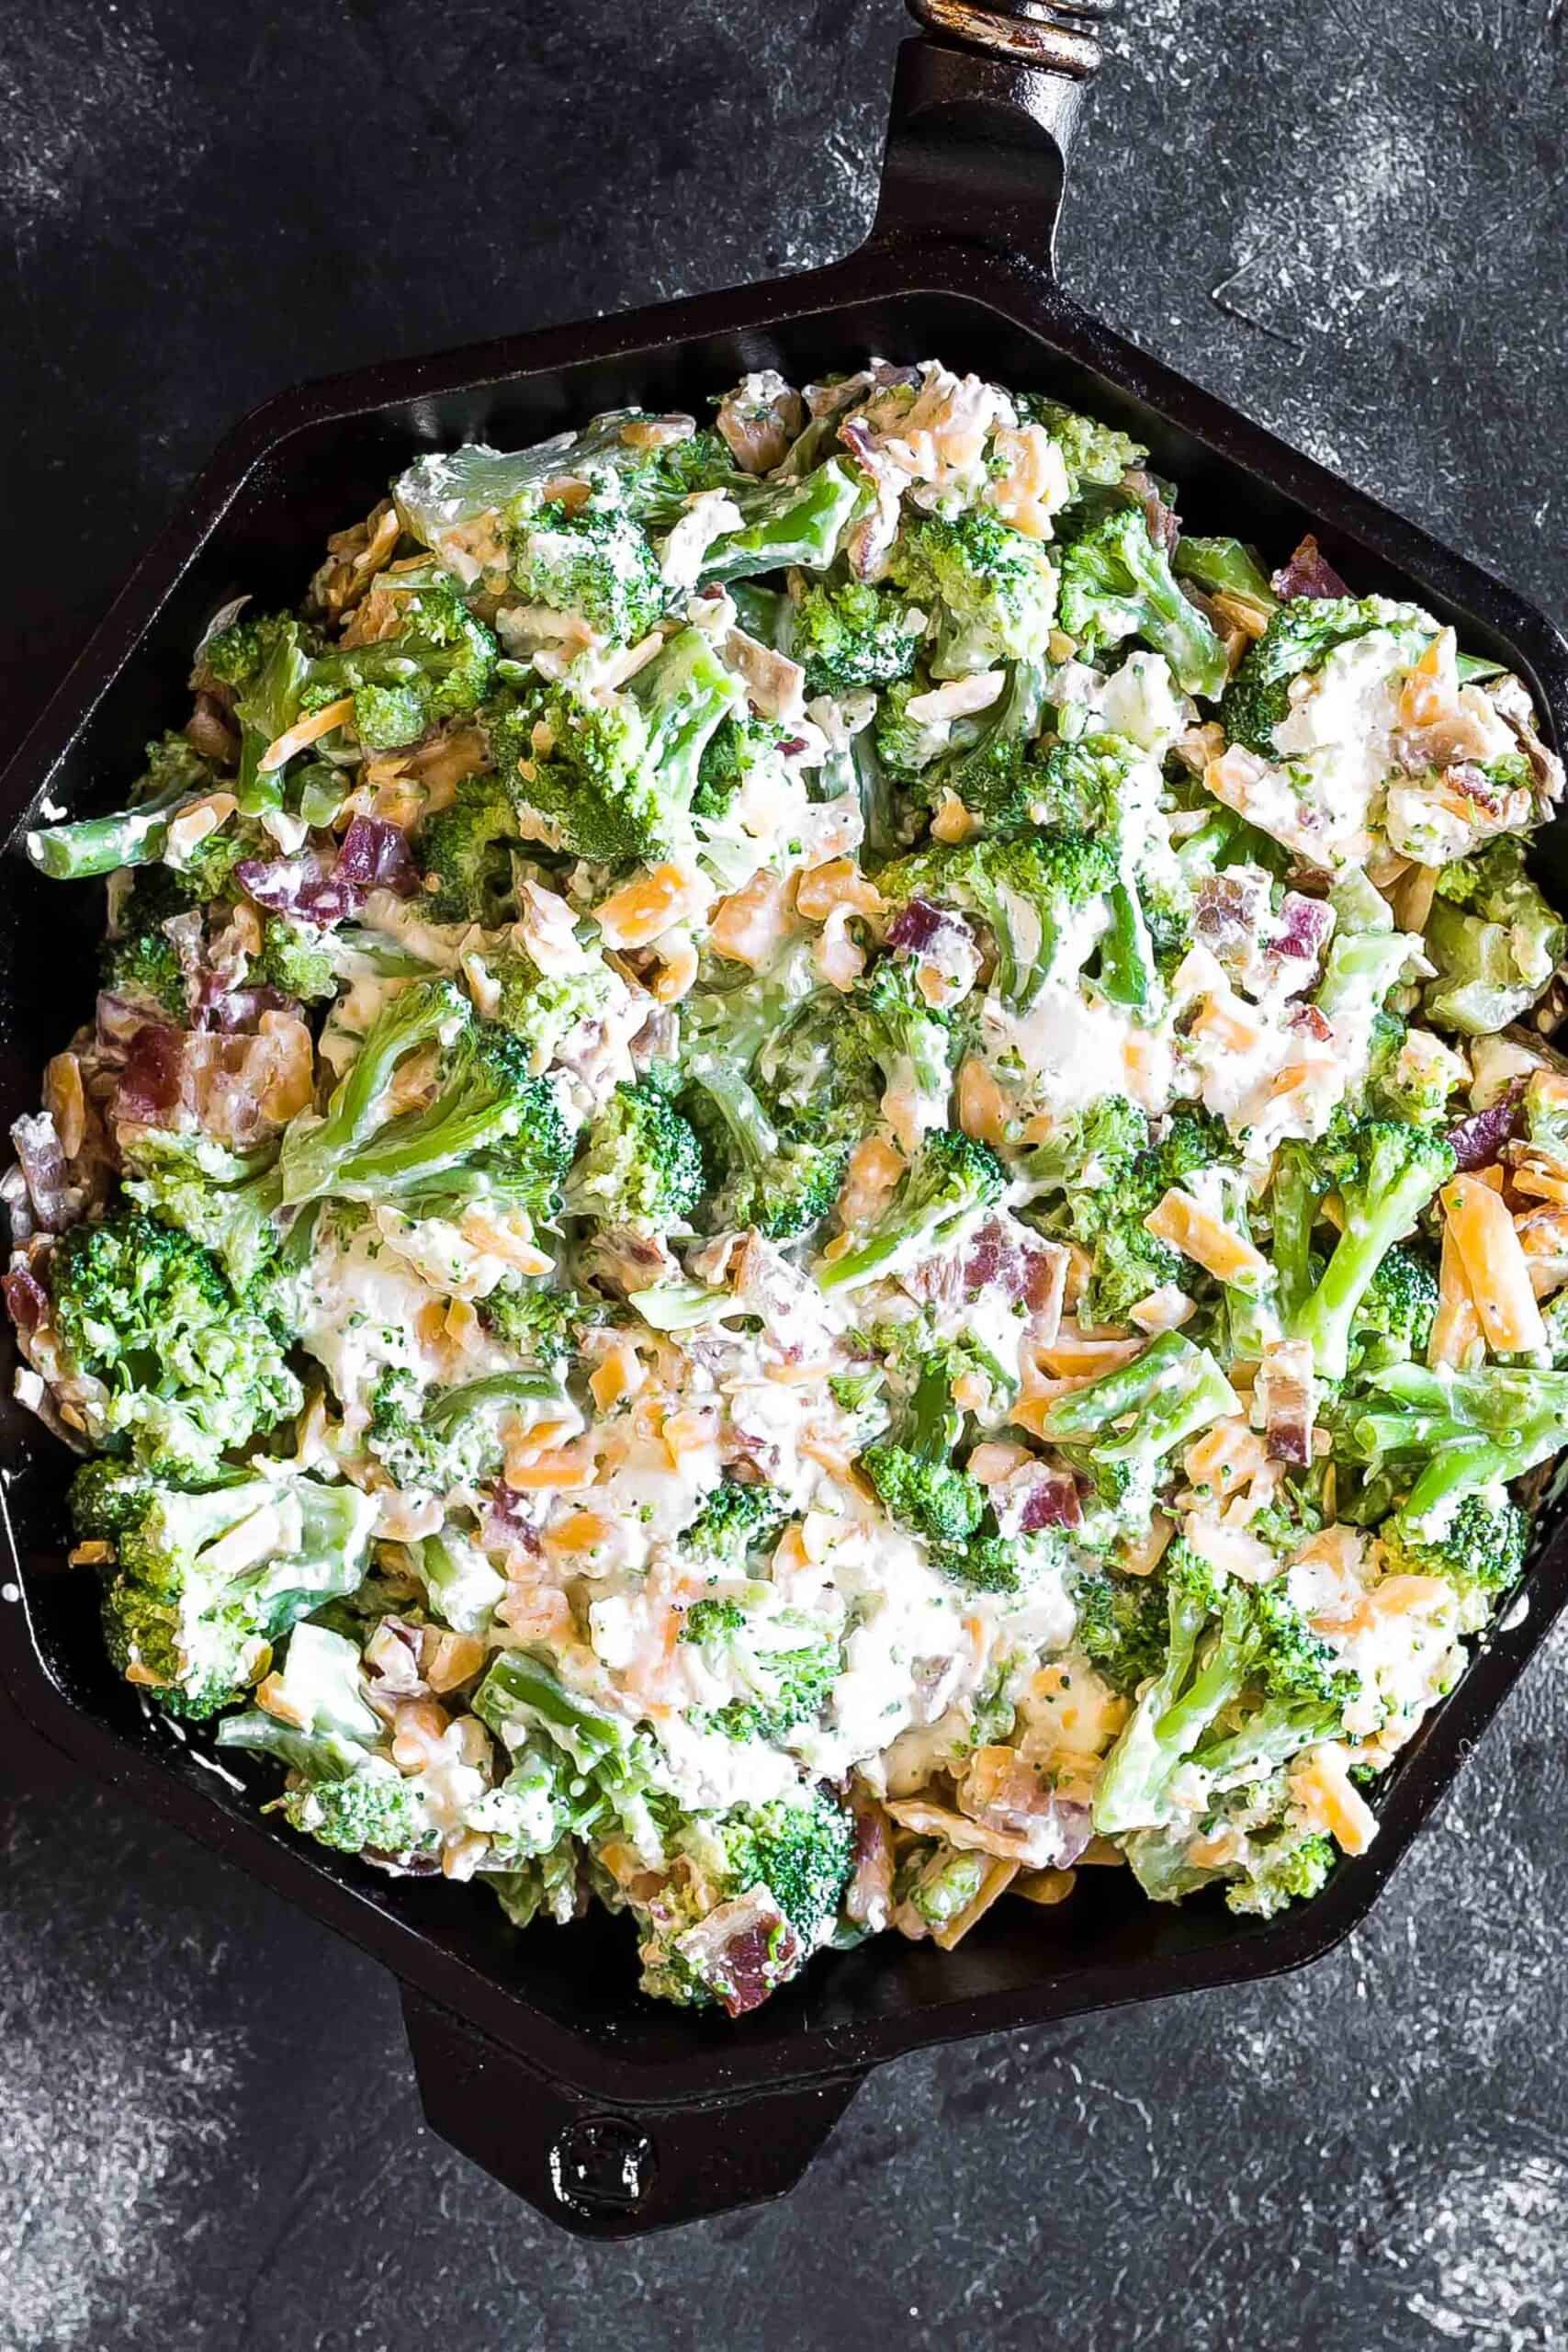 Cheesy Keto Broccoli Casserole before moon cheese topping is added